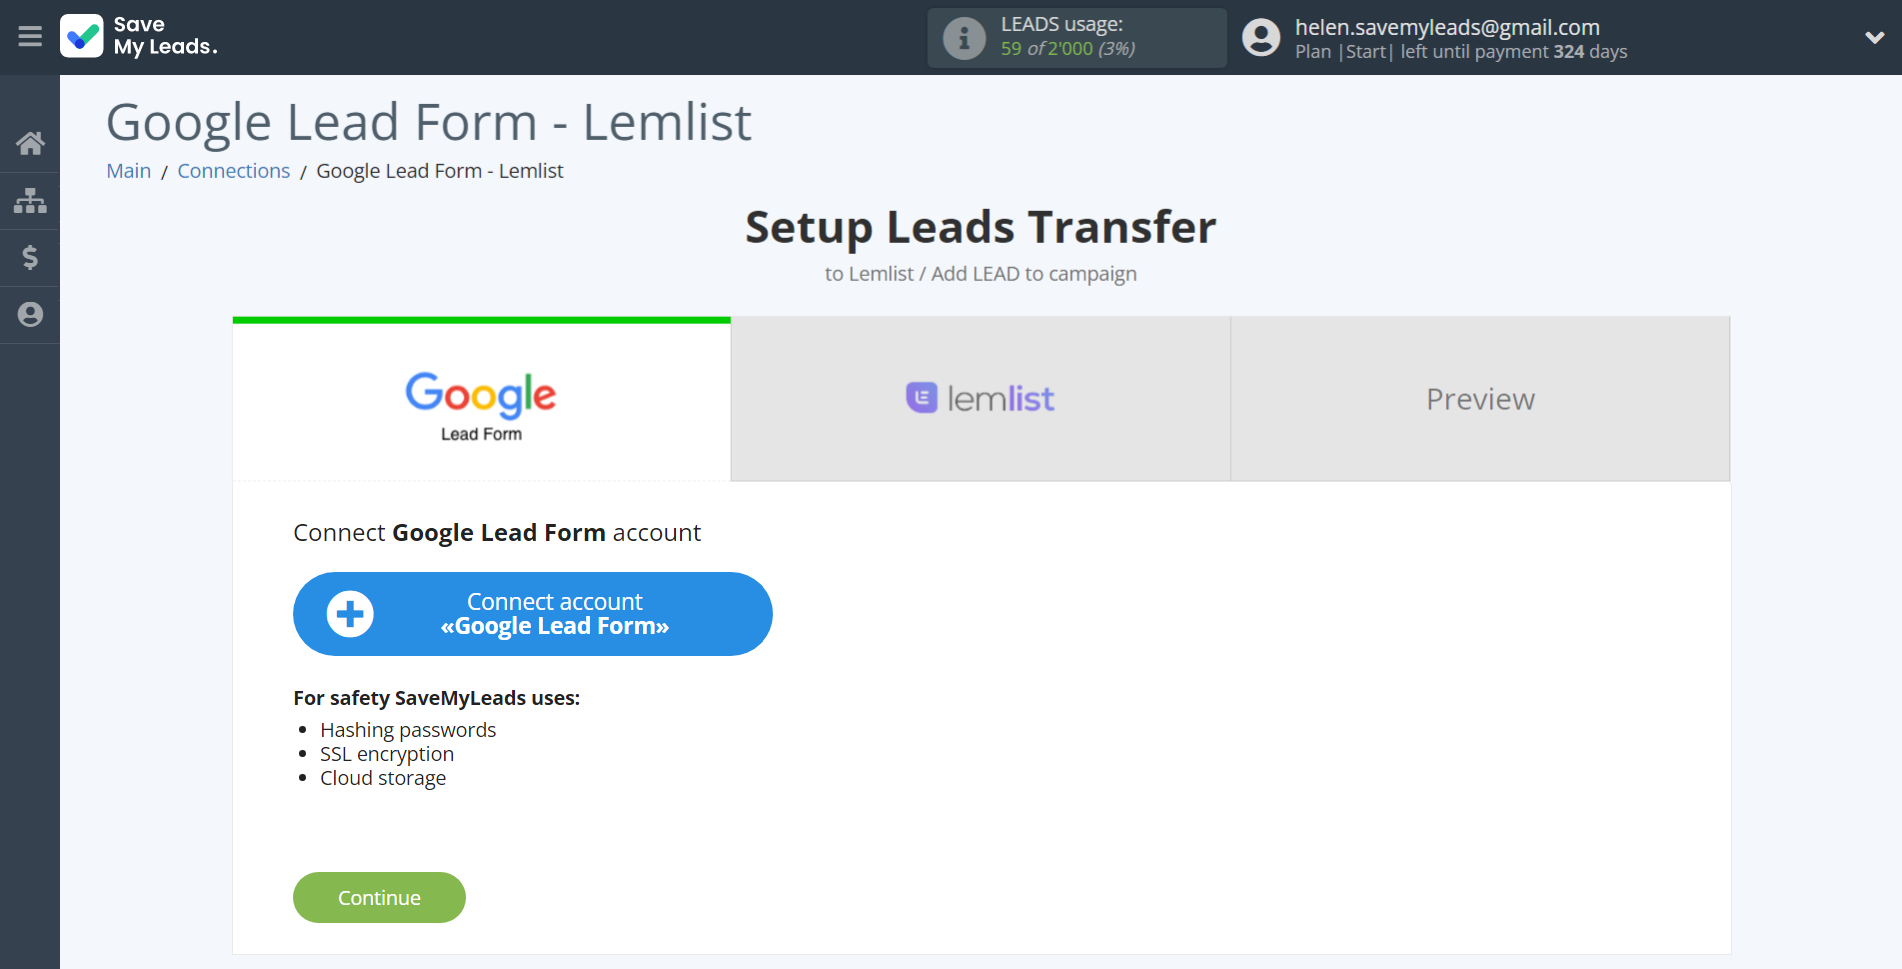 How to Connect Google Lead Form with Lemlist | Data Source account